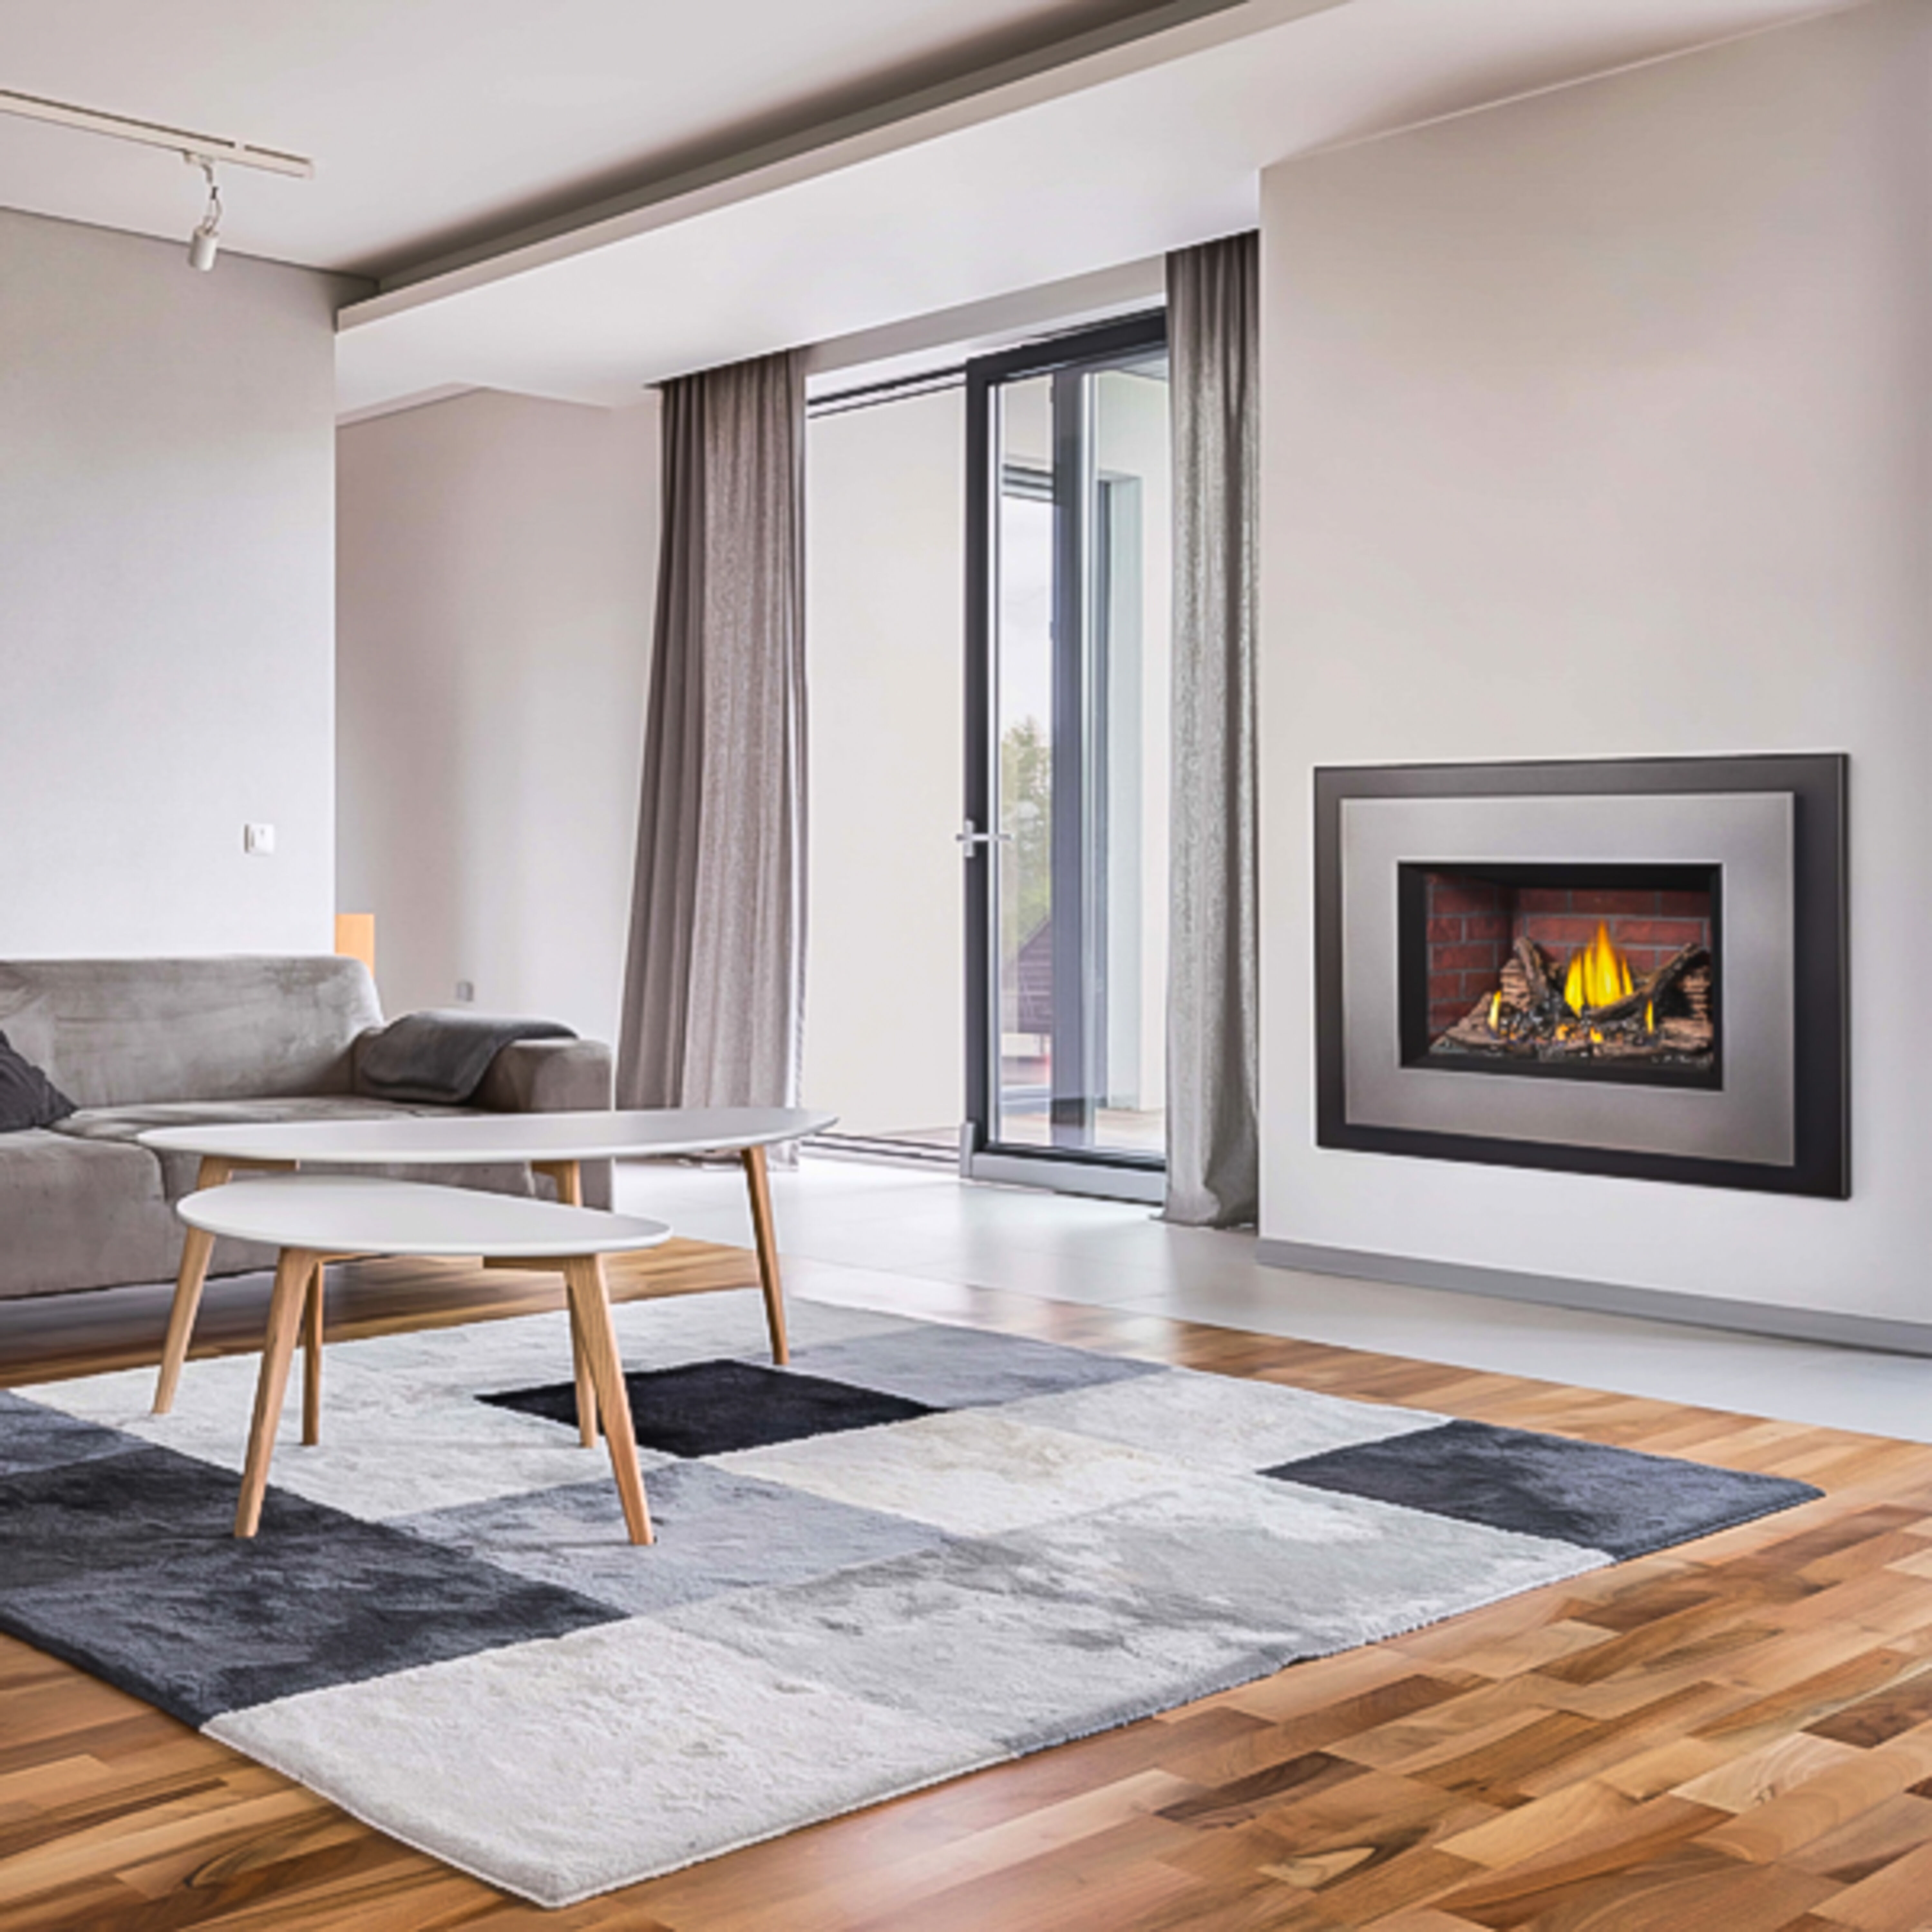 The Napoleon Oakville Direct Vent Gas Fireplace Insert is 28 inches wide and has an exclusive dual burner system that creates a triple flame pattern